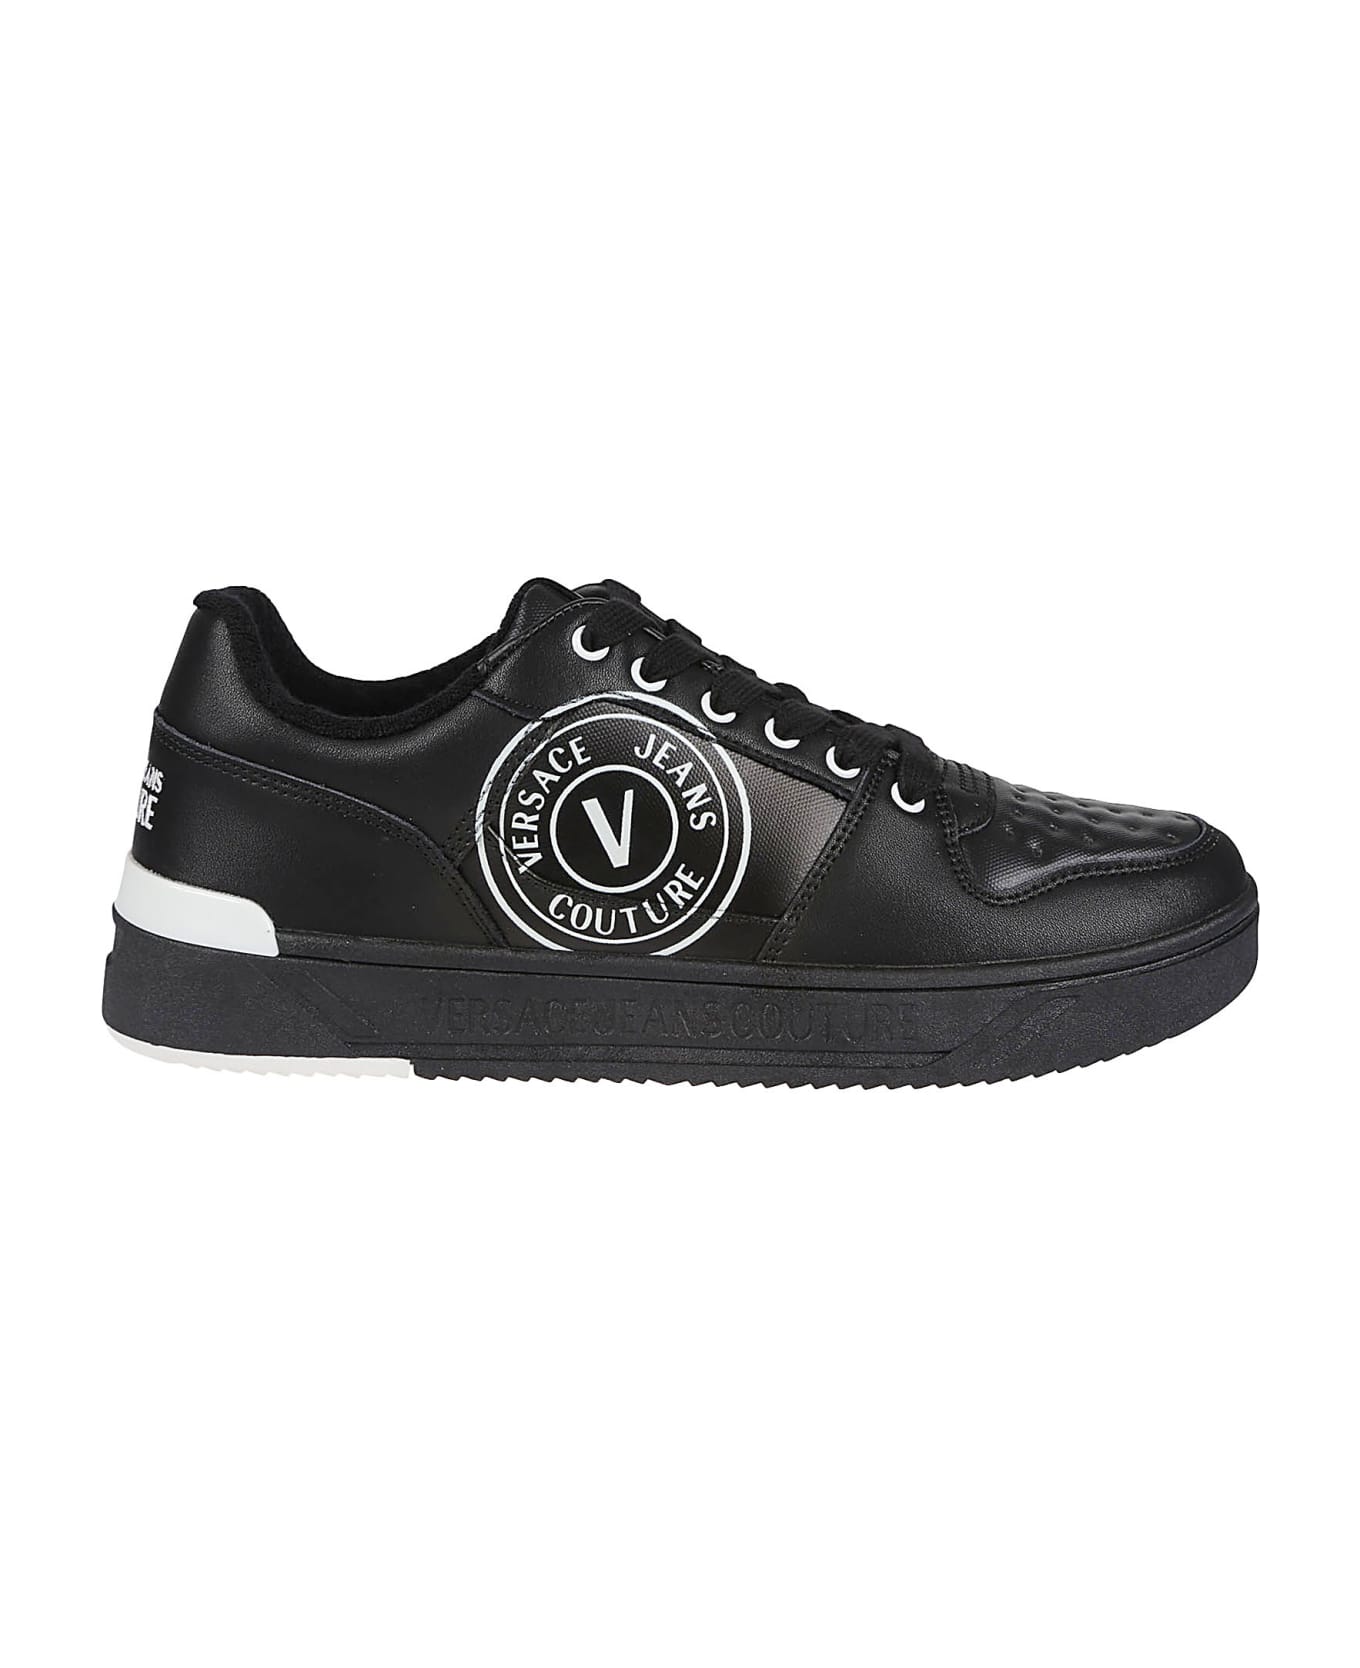 Versace Jeans Couture Starlight Sj1 Sneakers - Black